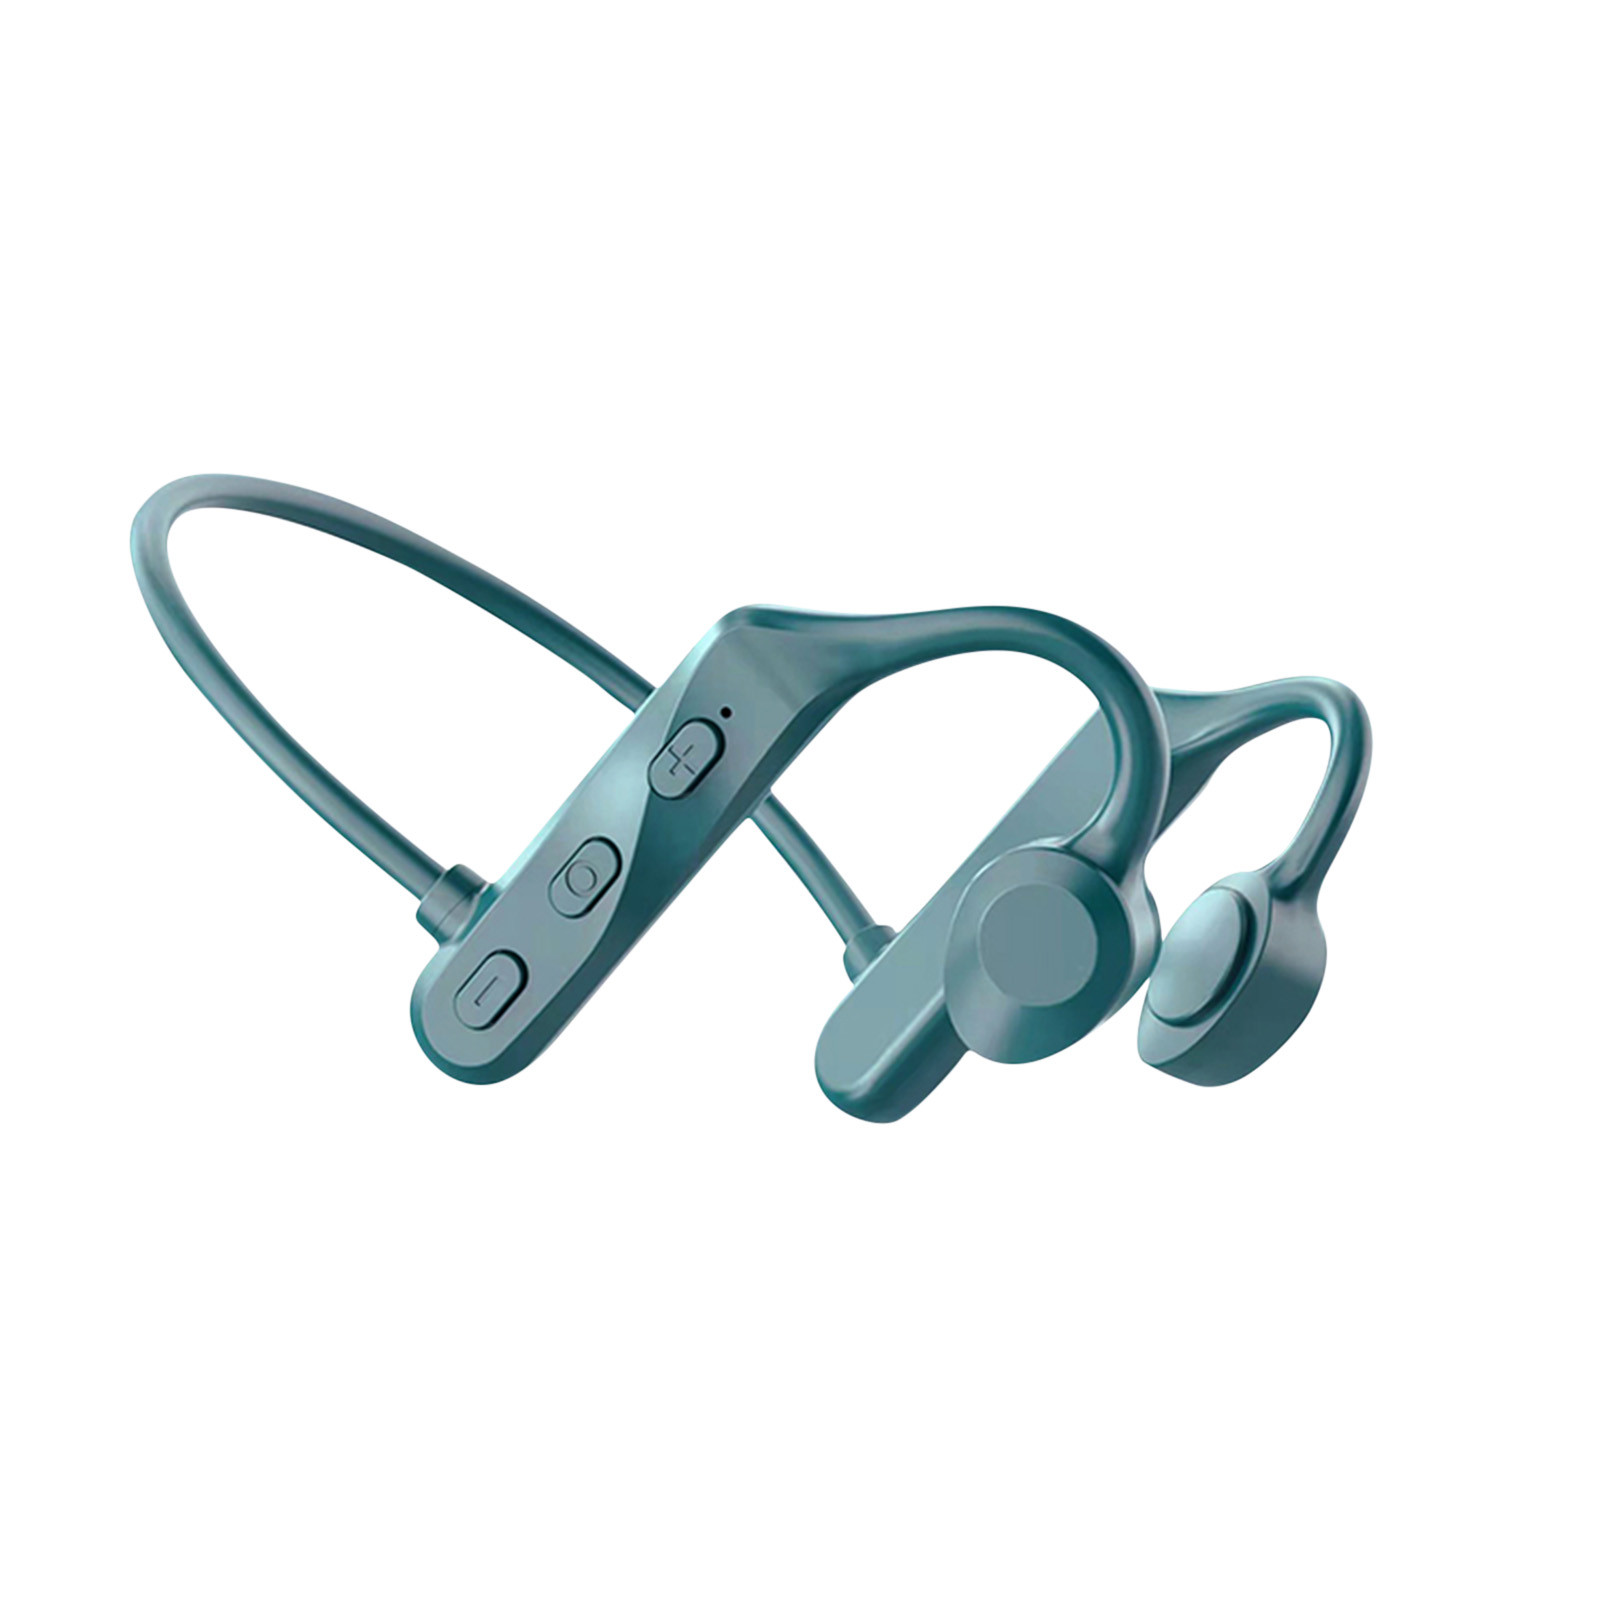 EQWLJWE True Conduction Concept Bluetooth Headset Does Not Enter The Ear, Wireless Sports, Comfortable To Wear And Waterproof Bluetooth Headset Holiday Clearance - image 1 of 2